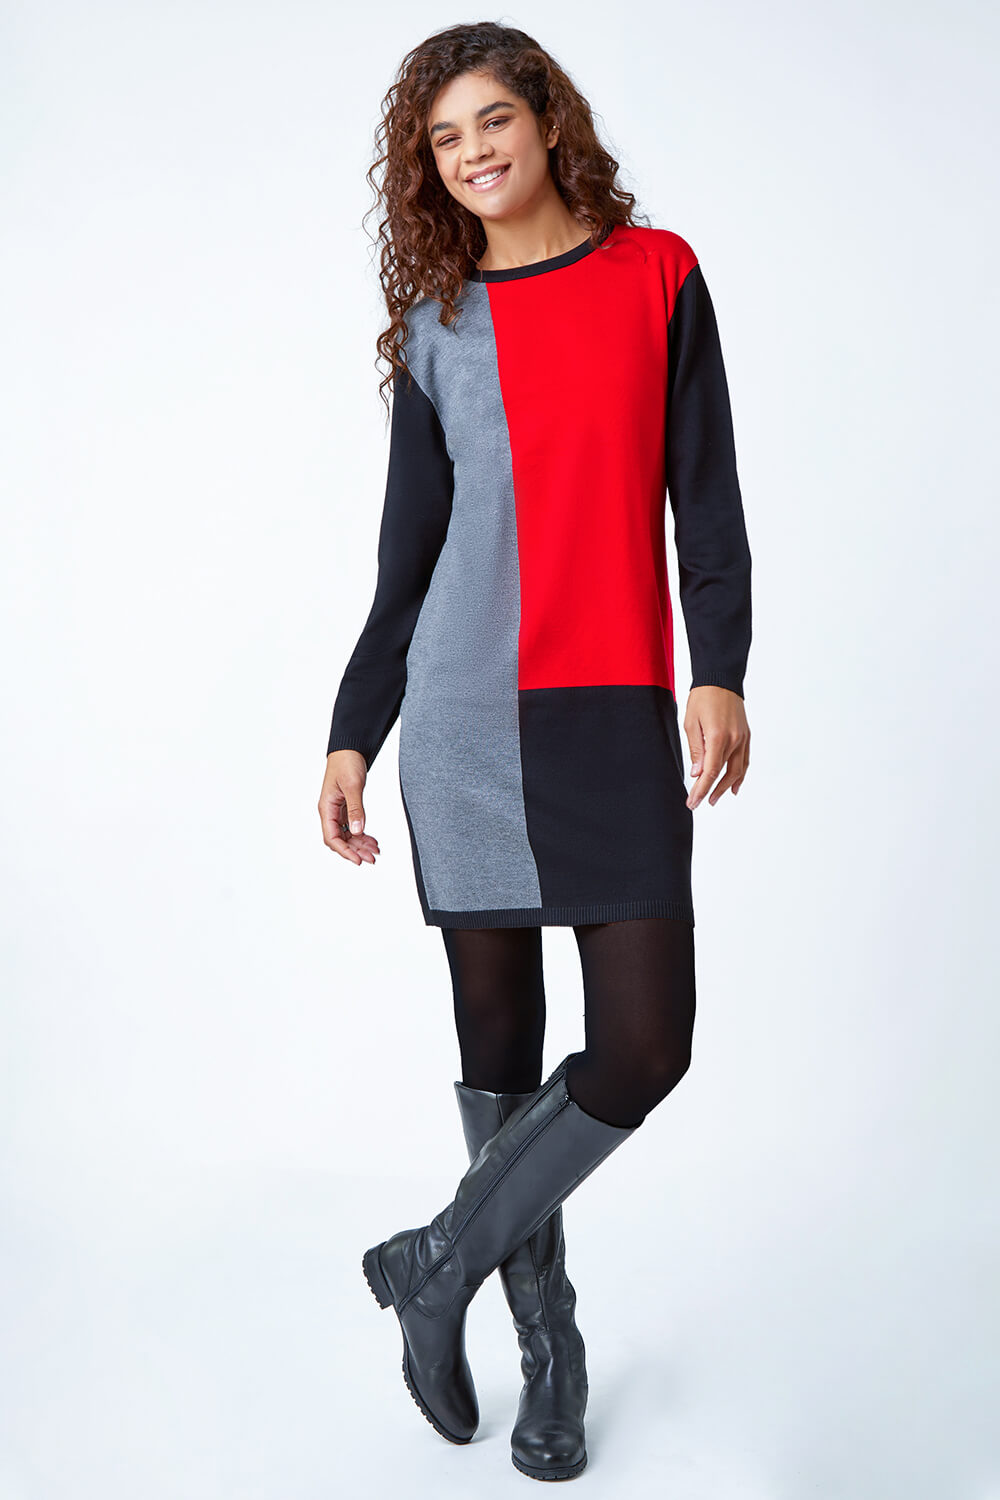 Red Colour Block Knitted Jumper Dress, Image 2 of 5